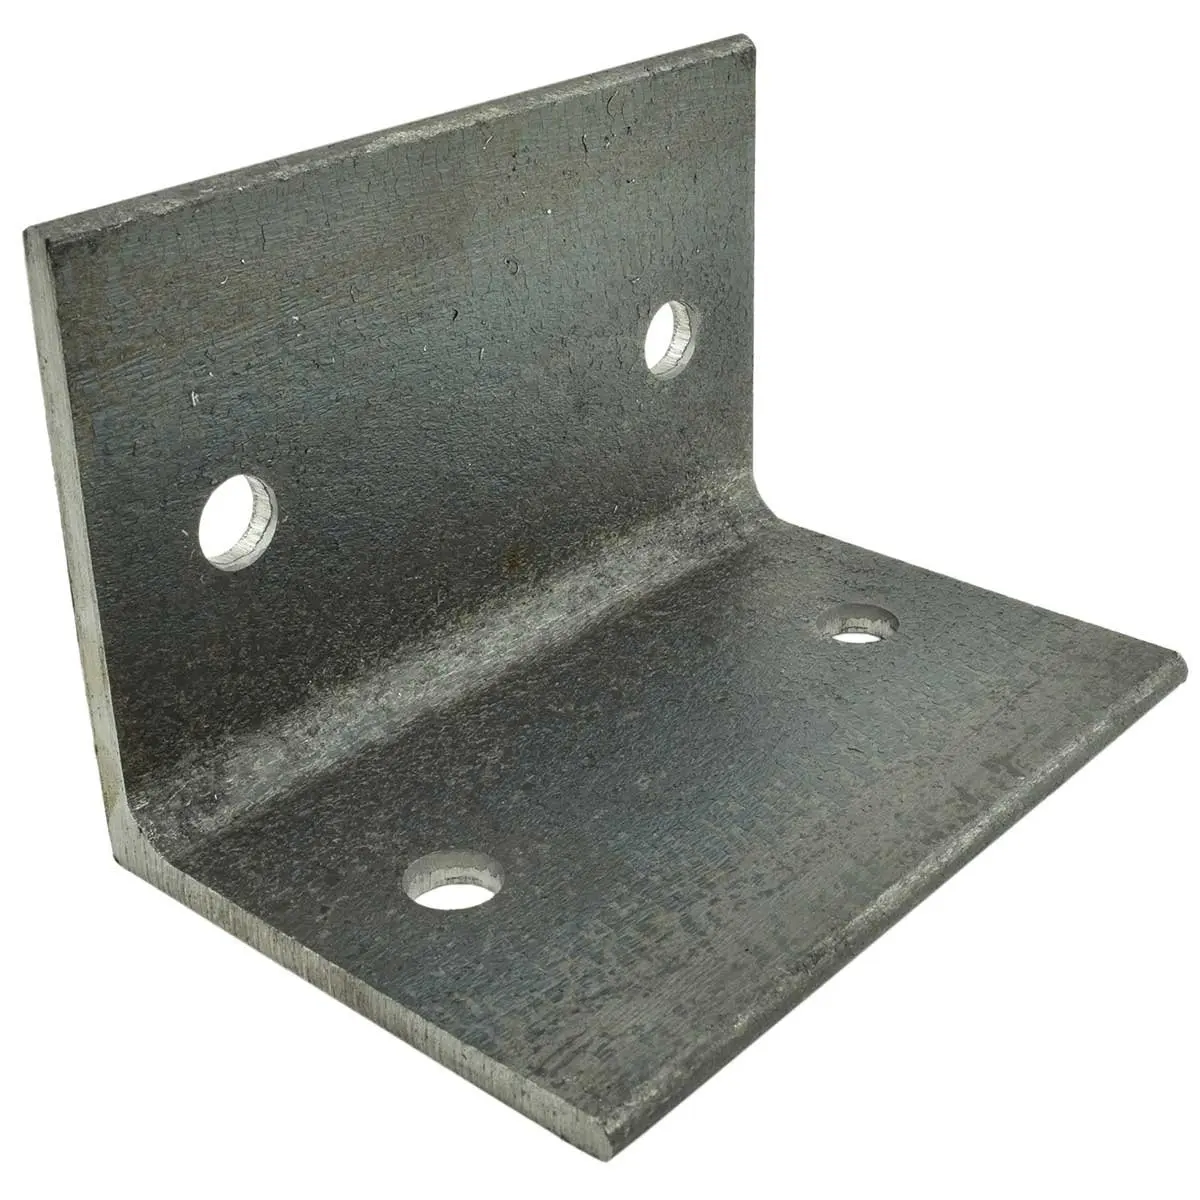 4 Custom Fabricated 9/16 Holes for 1/2 Bolts 6 x 6 x 1/4 Hot Rolled A36 Steel Base Plate with